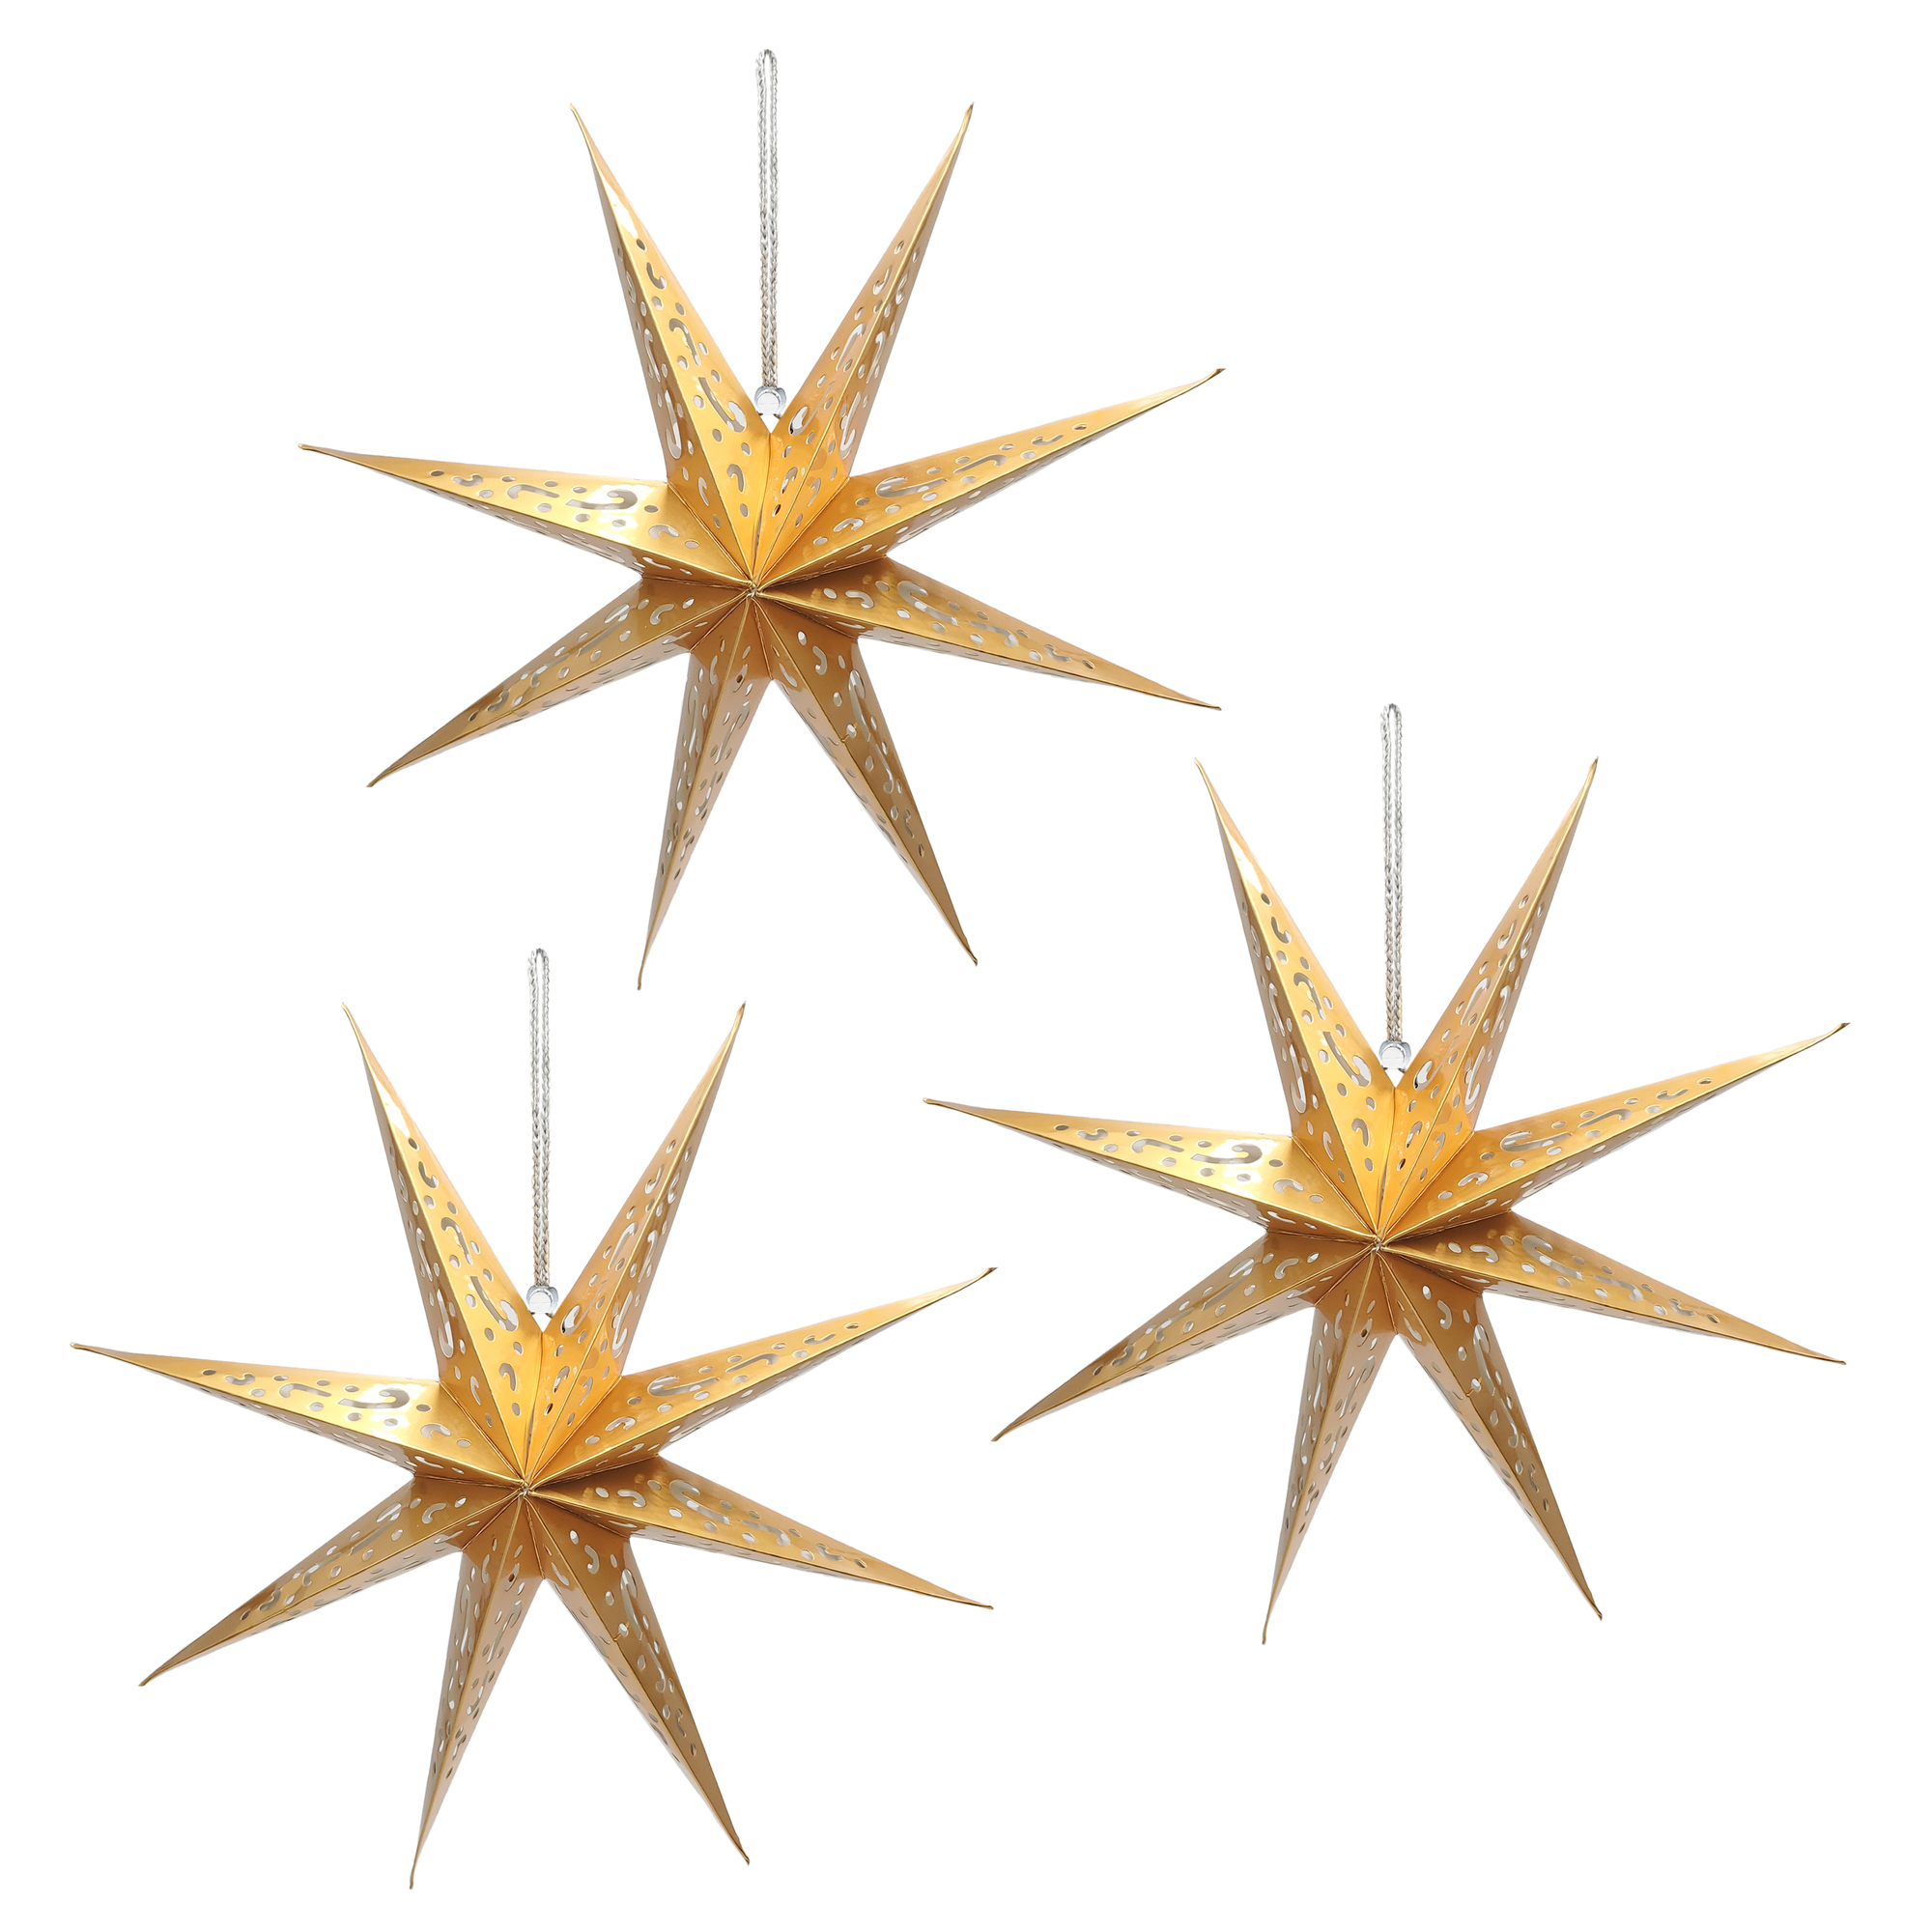 Chirstmas Star Lamp 7-Pointed Hanging Star Lampshade Home Decor 75cm Paper Star Lanterns